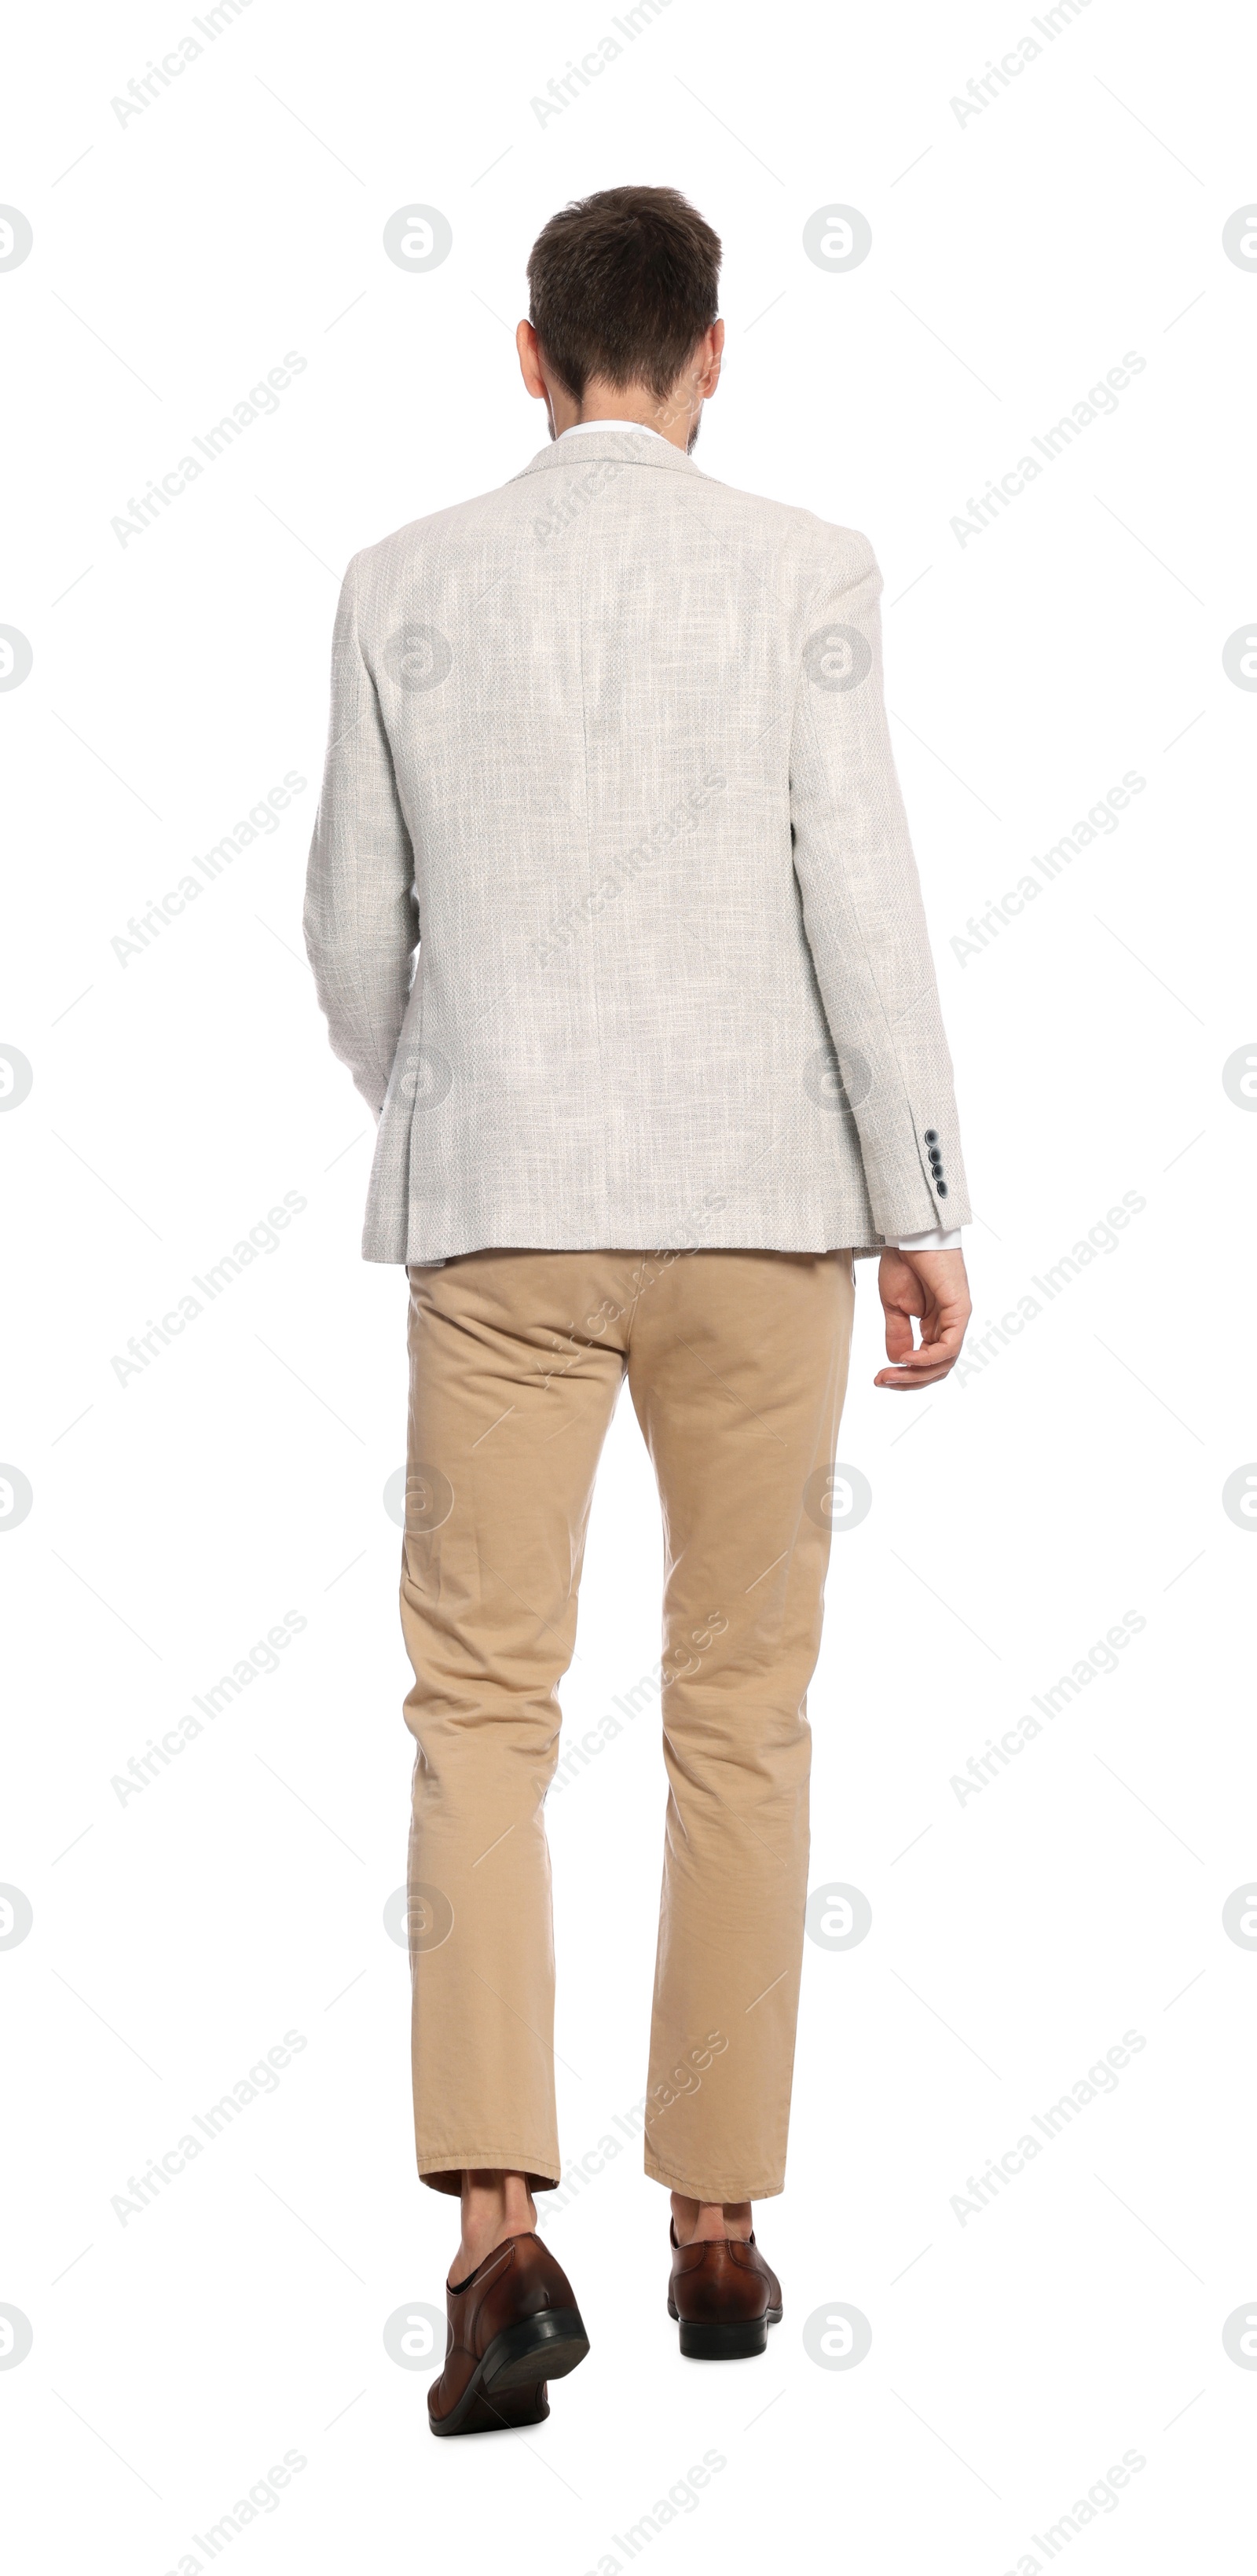 Photo of Man in stylish outfit walking on white background, back view